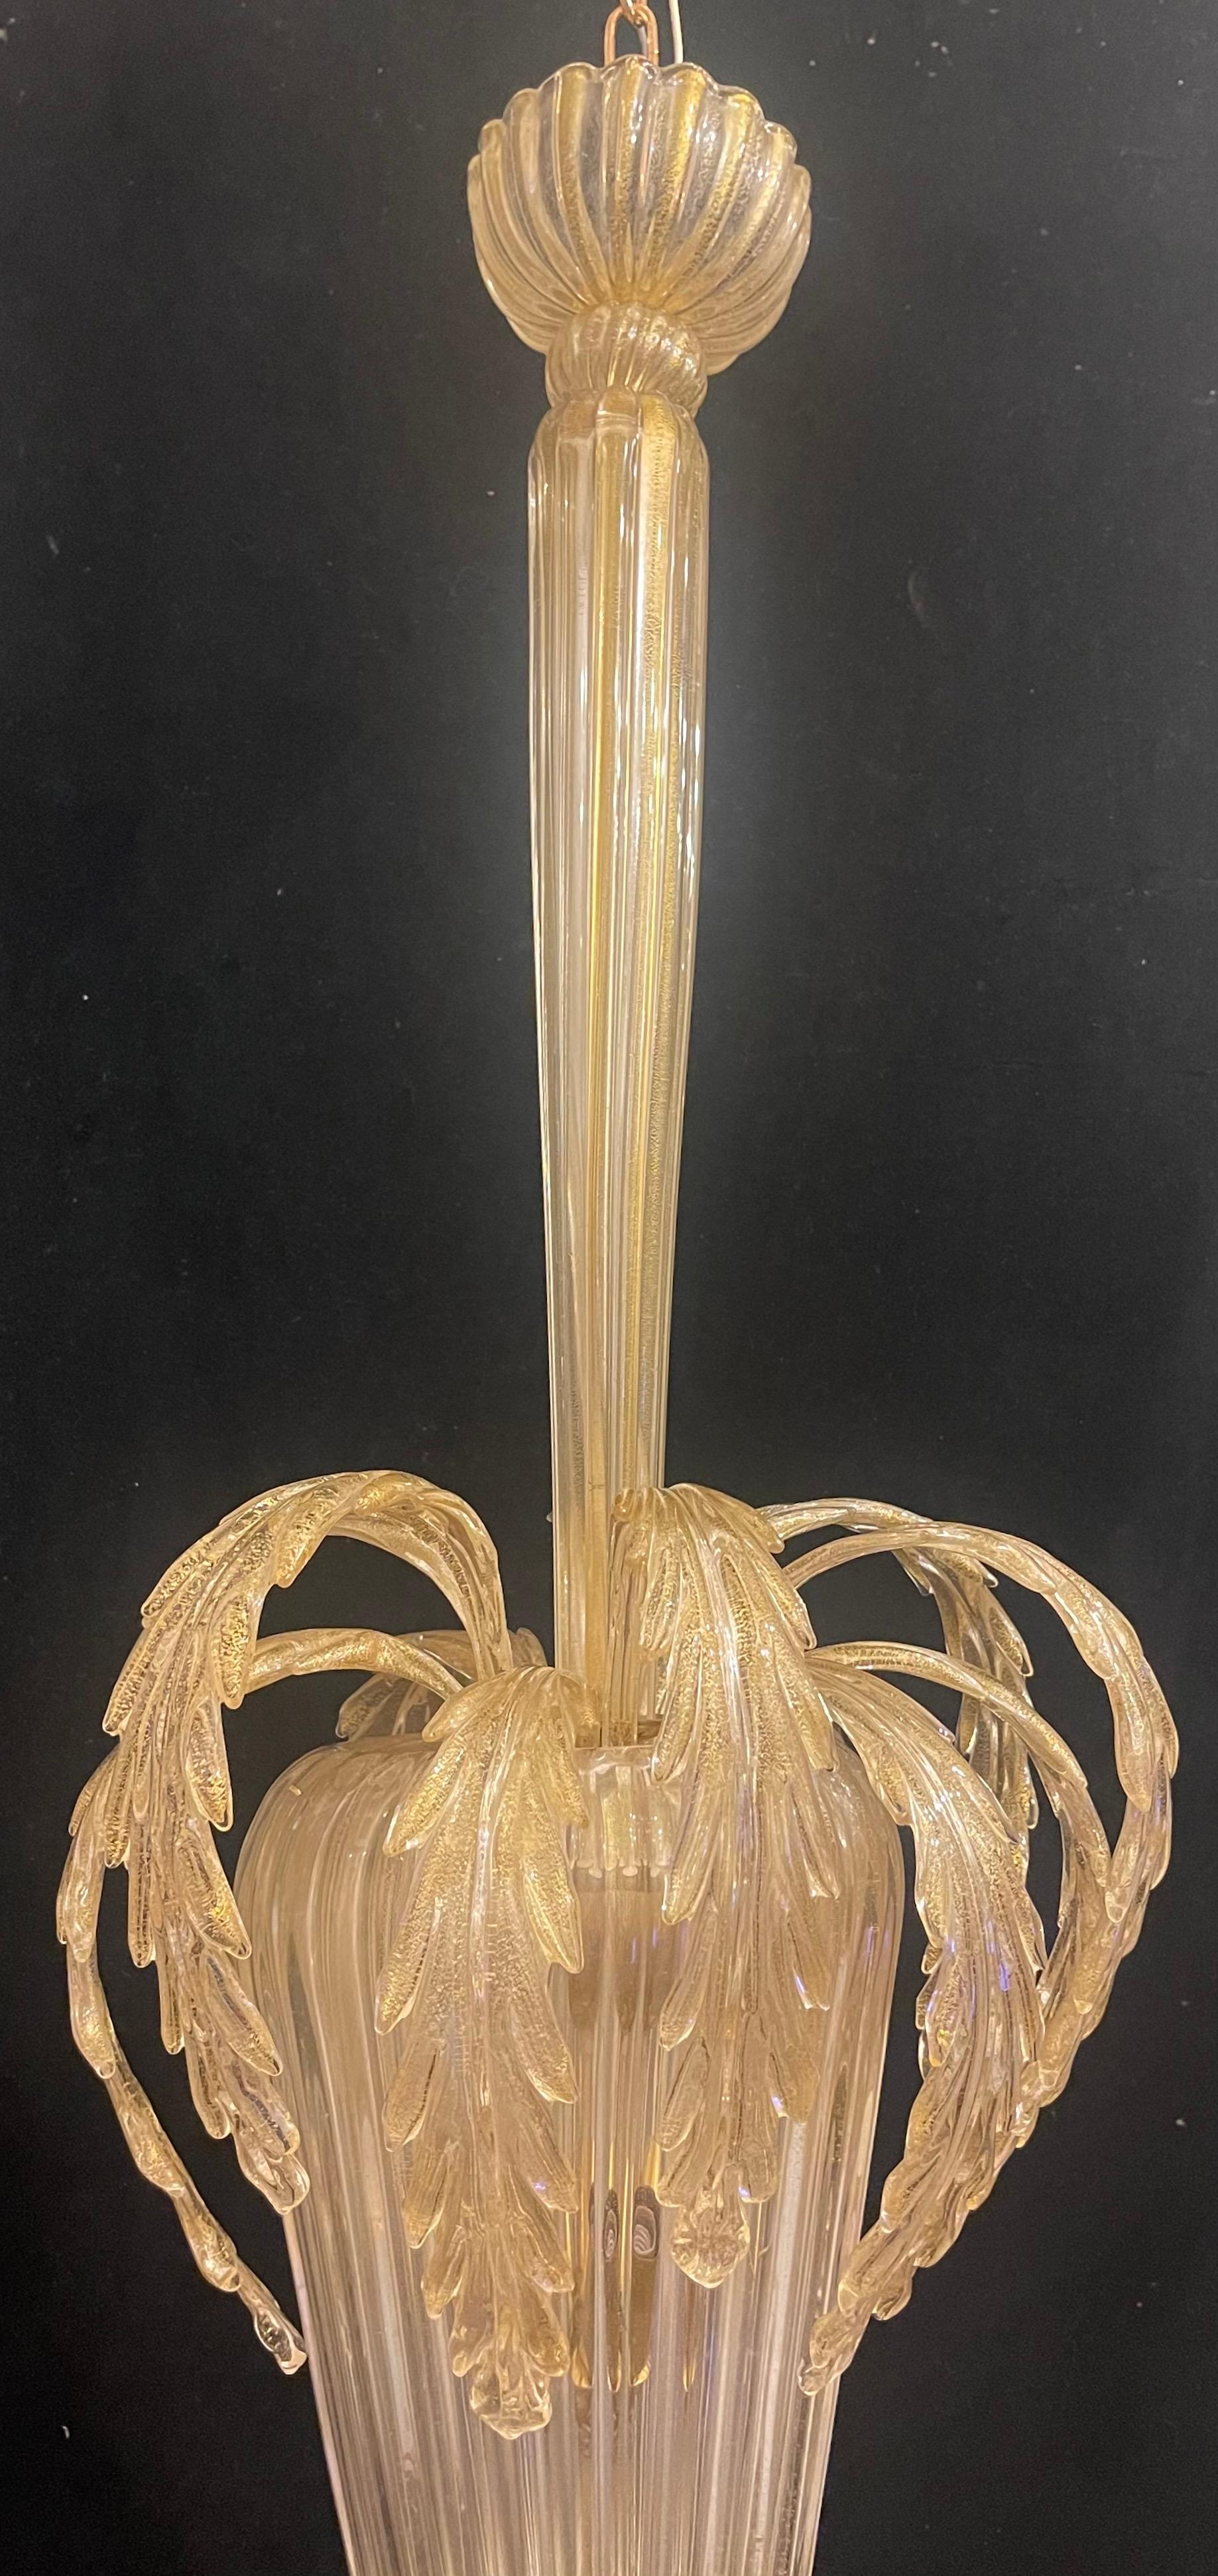 A Wonderful Mid-Century Modern Italian Murano Venetian Gold Flake Blown Glass, Leaves Spraying Over A Center Bowl With 3 Candelabra Internal Lights That Have Been Completely Rewired With New Sockets. This Beautiful Chandelier Is In The Manner /